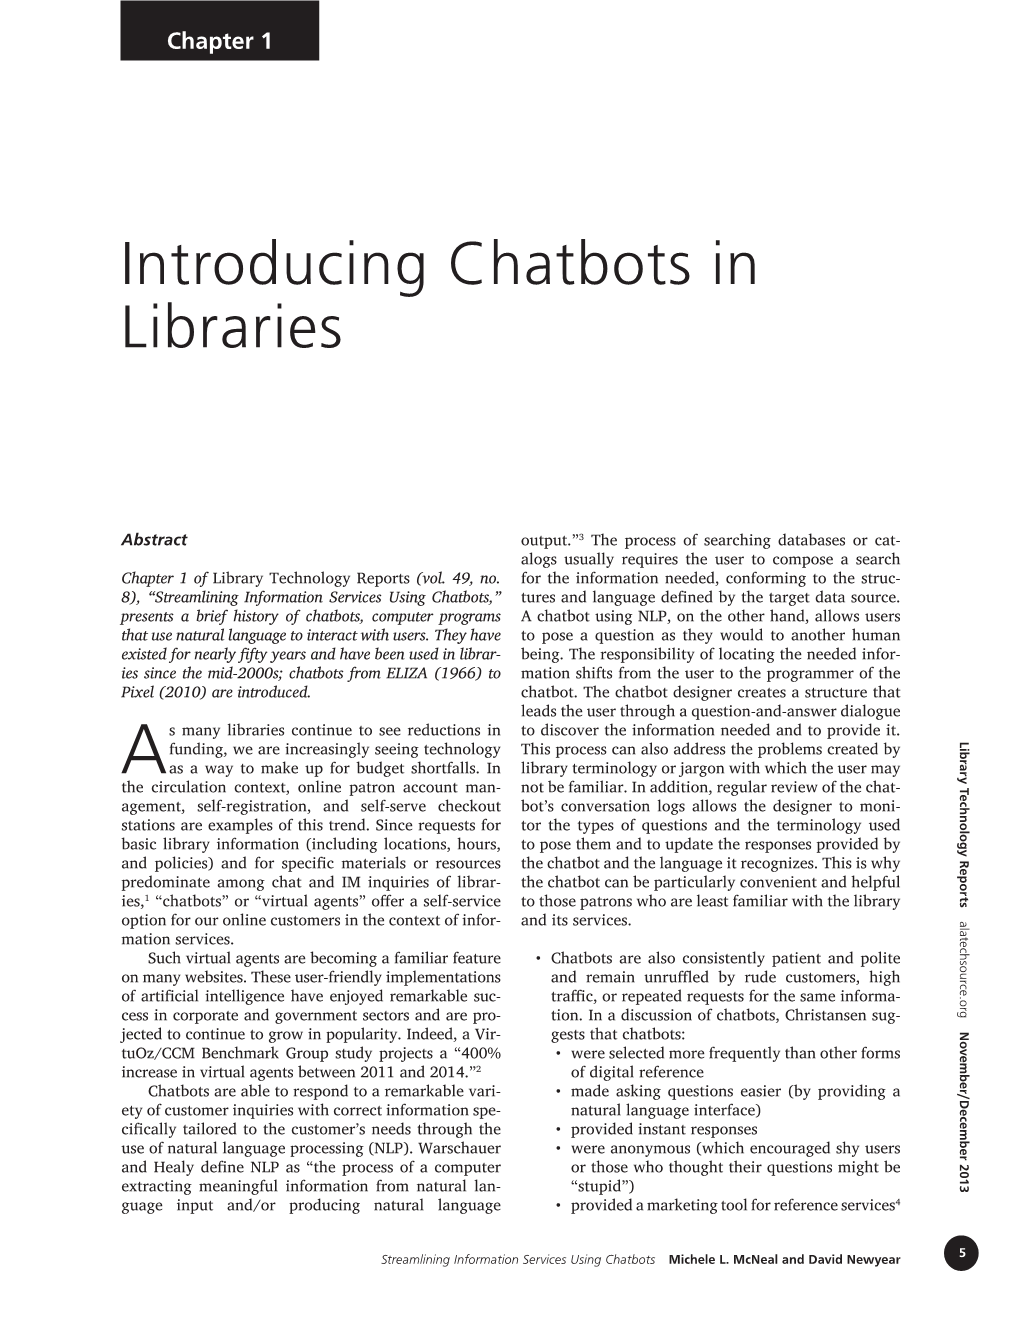 Introducing Chatbots in Libraries